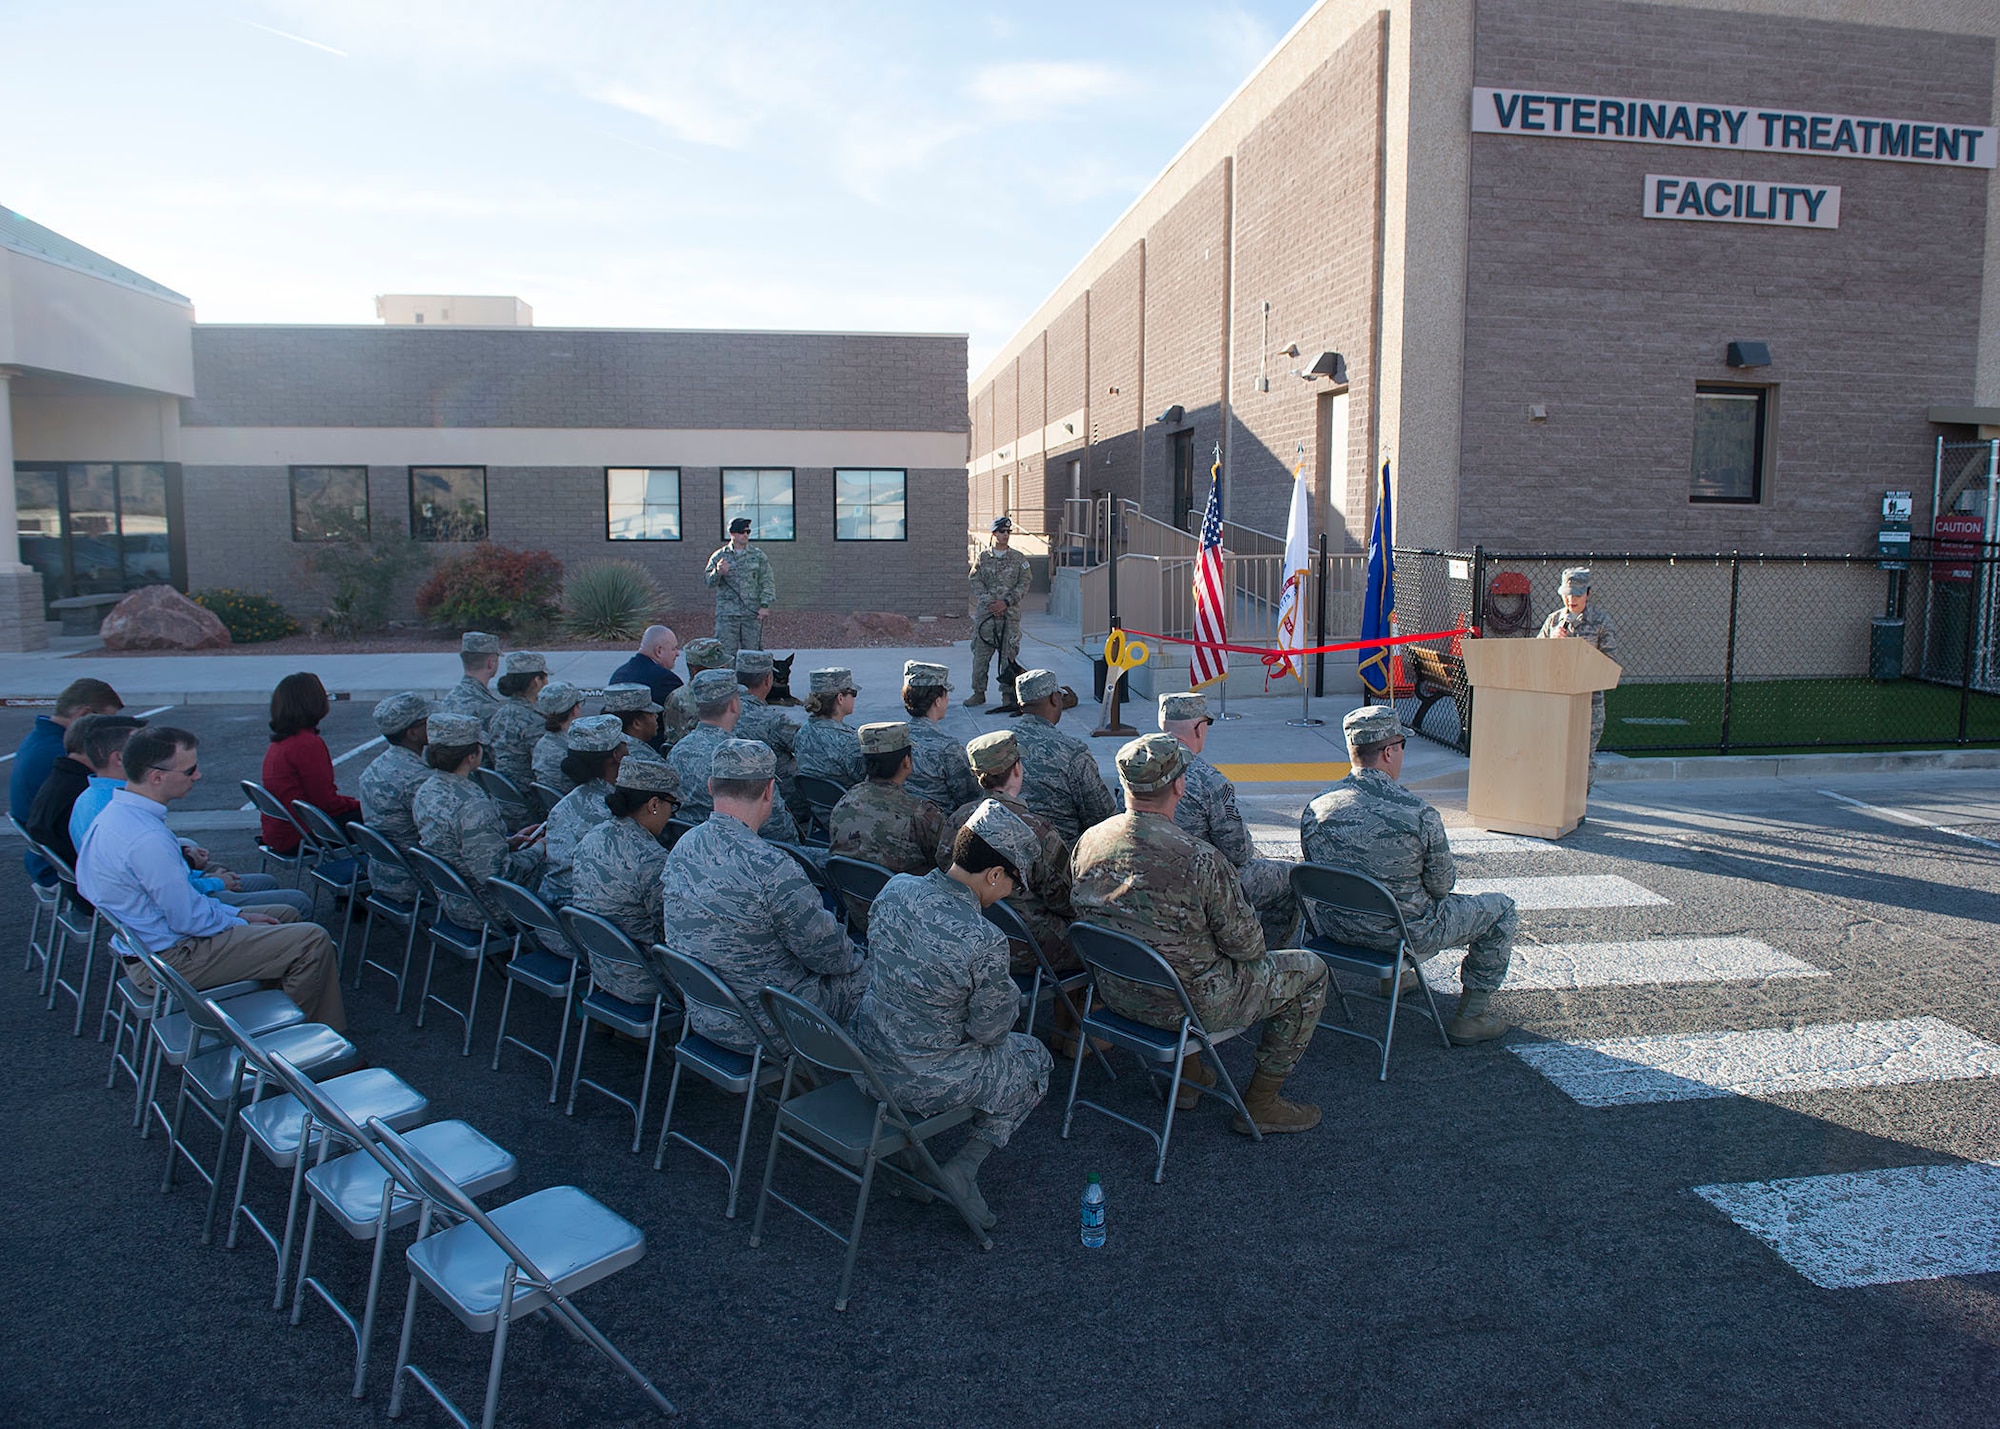 Base leadership, distinguished visitors and veterinary treatment facility staff cut the ribbon to signify the opening of the facility on Nellis Air Force Base, Nev., Nov. 14, 2018. The new facility is 3,600 square feet, which is twice the size of the previous facility. (U.S. Air Force photo by Airman 1st Class Bryan T. Guthrie)